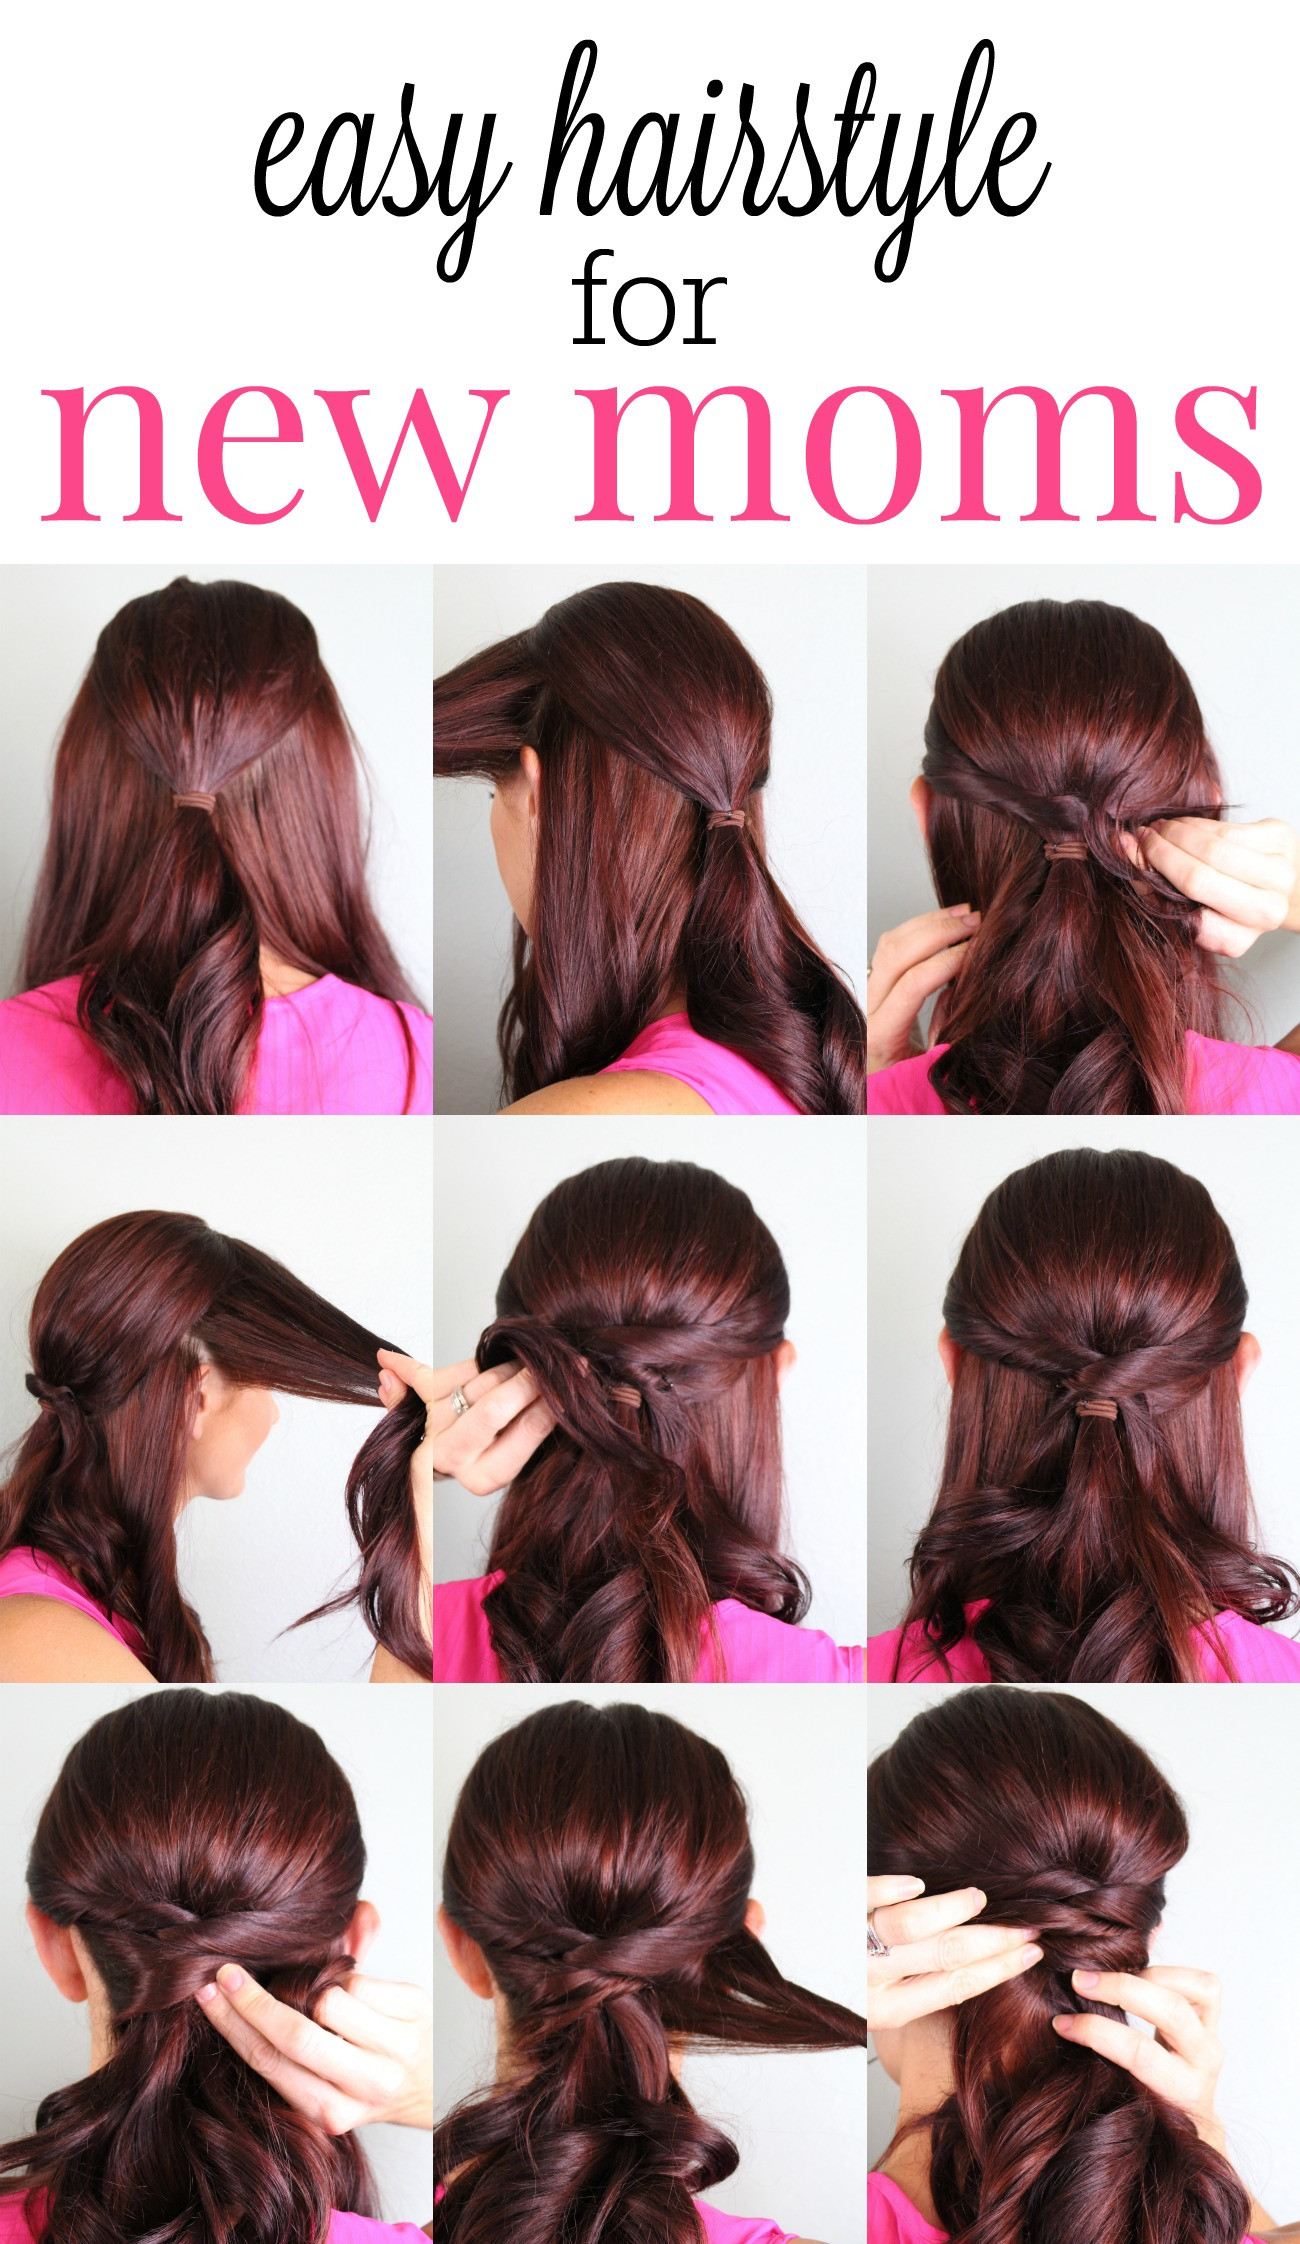 Easy Hairstyles For Moms
 Easy Hairstyle for New Moms